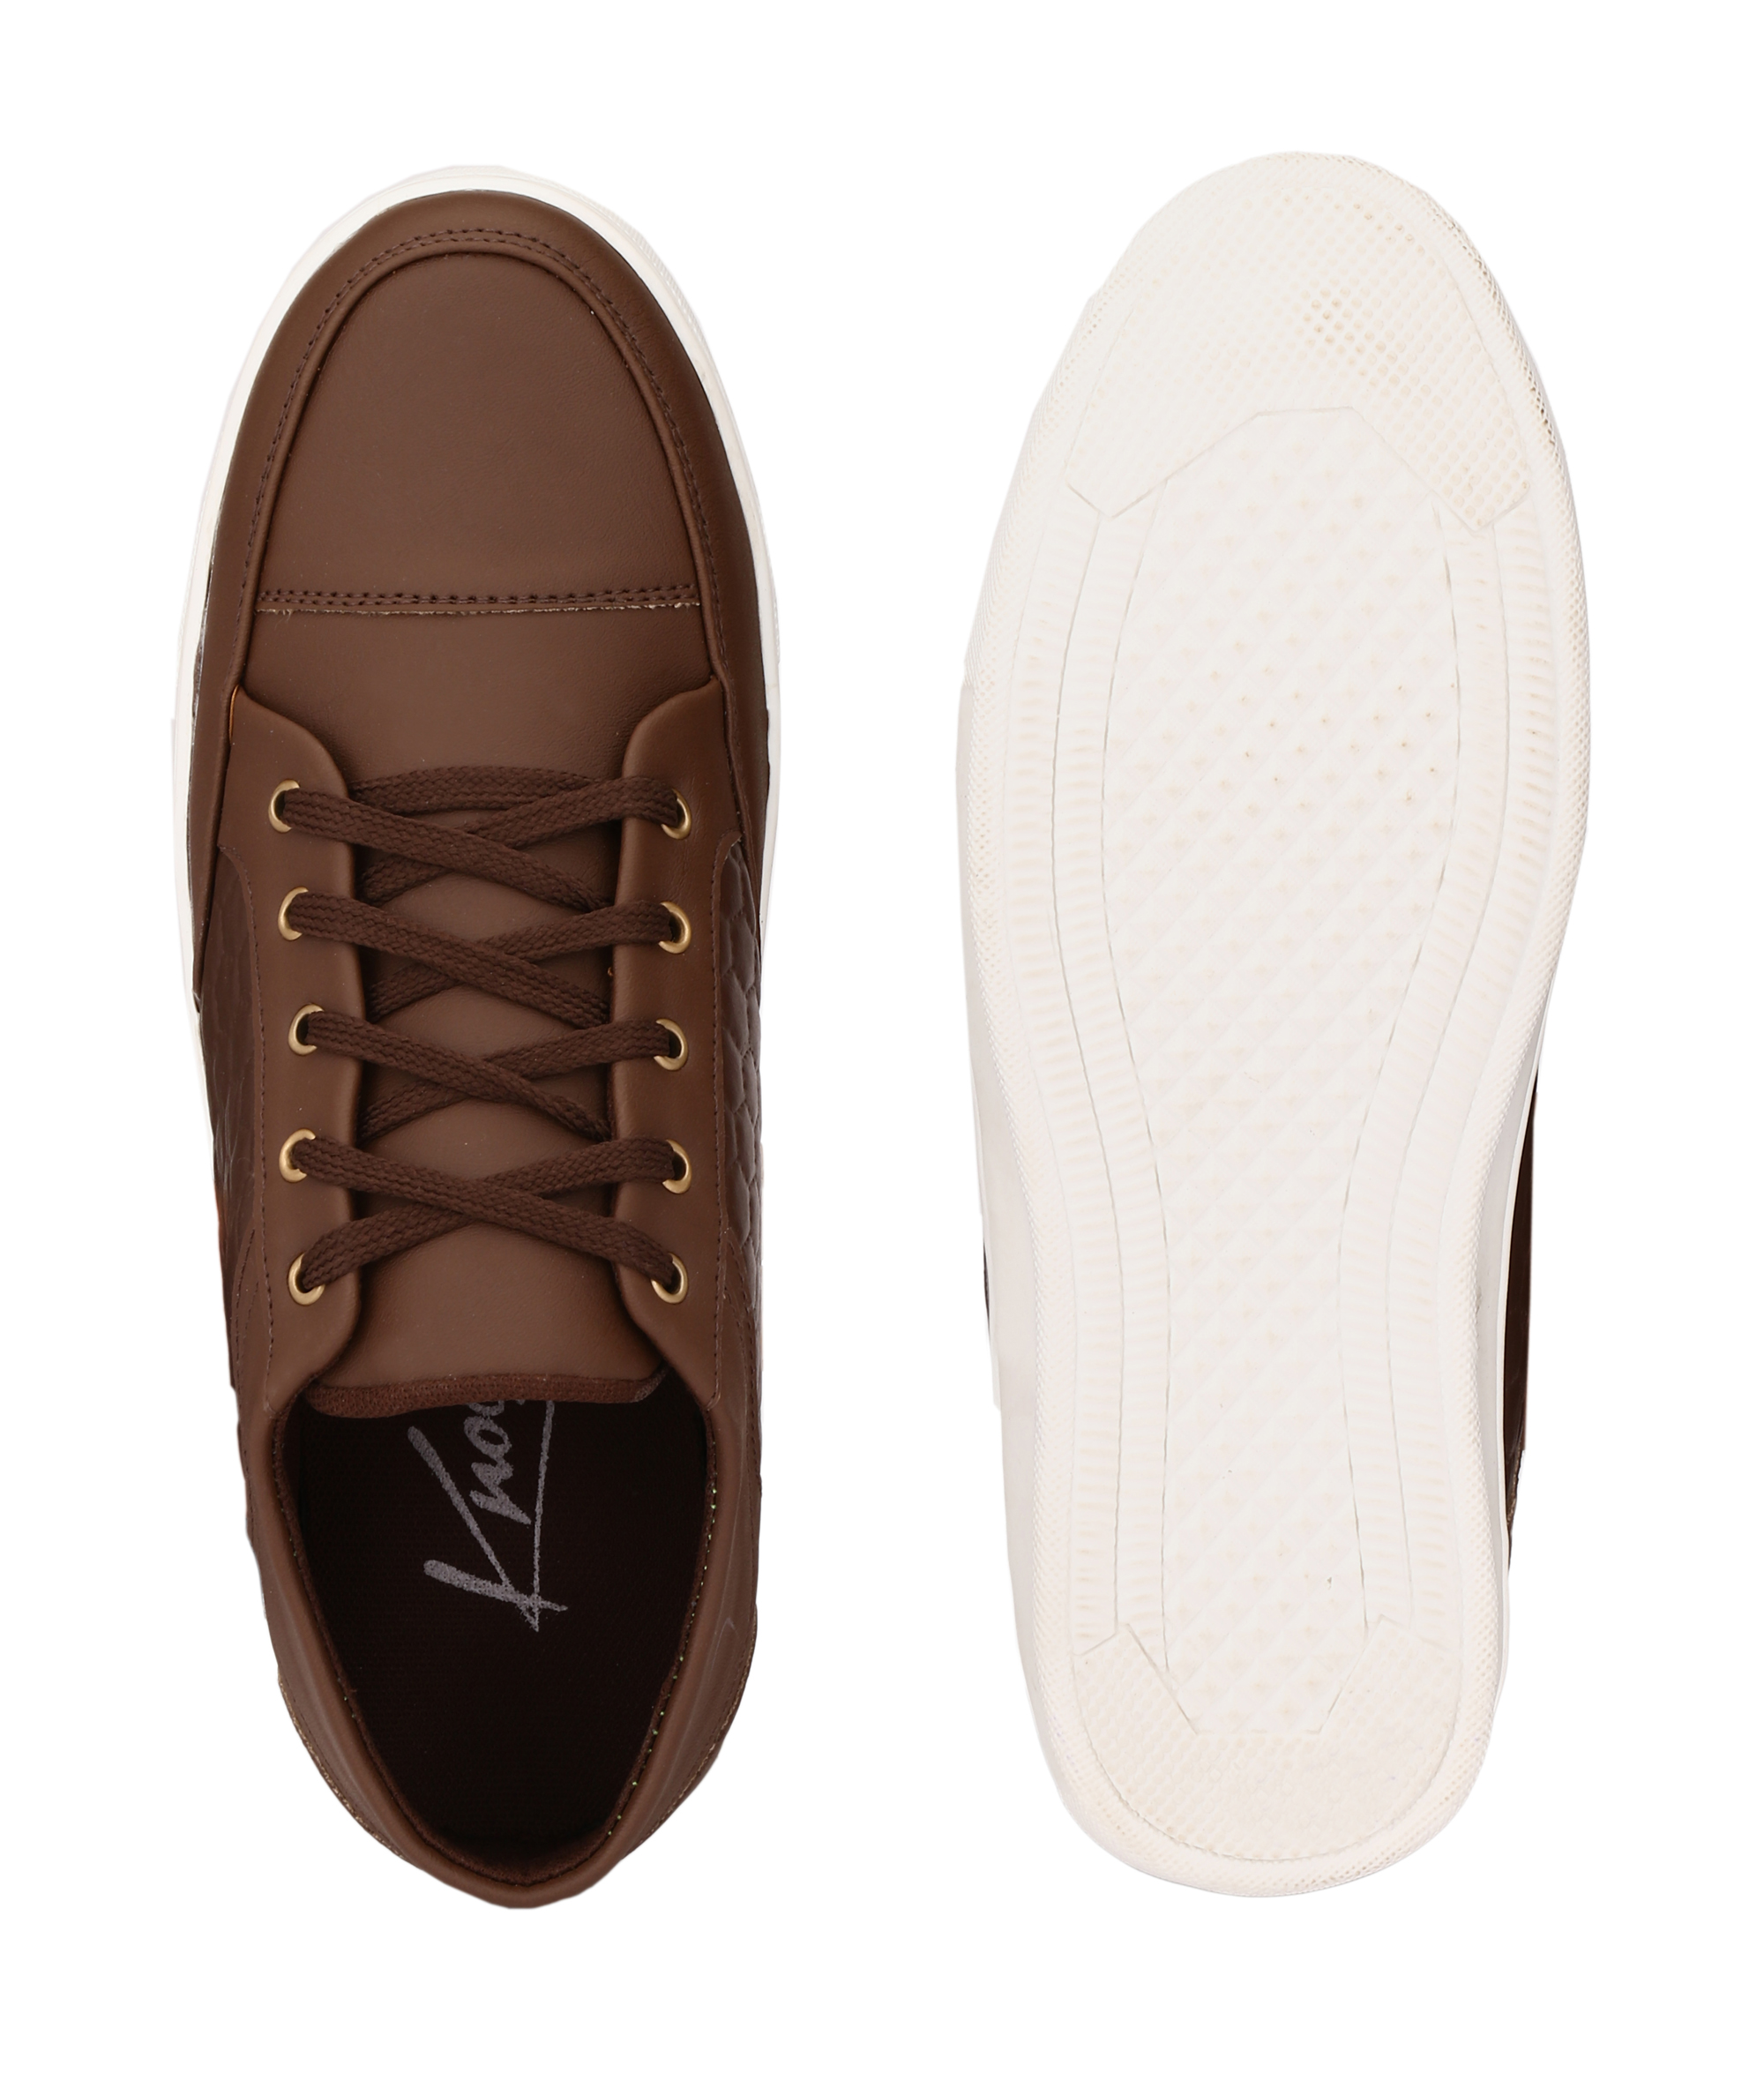 Buy Knoos Men Brown Lace-Up Casual Shoes Online @ ₹569 from ShopClues